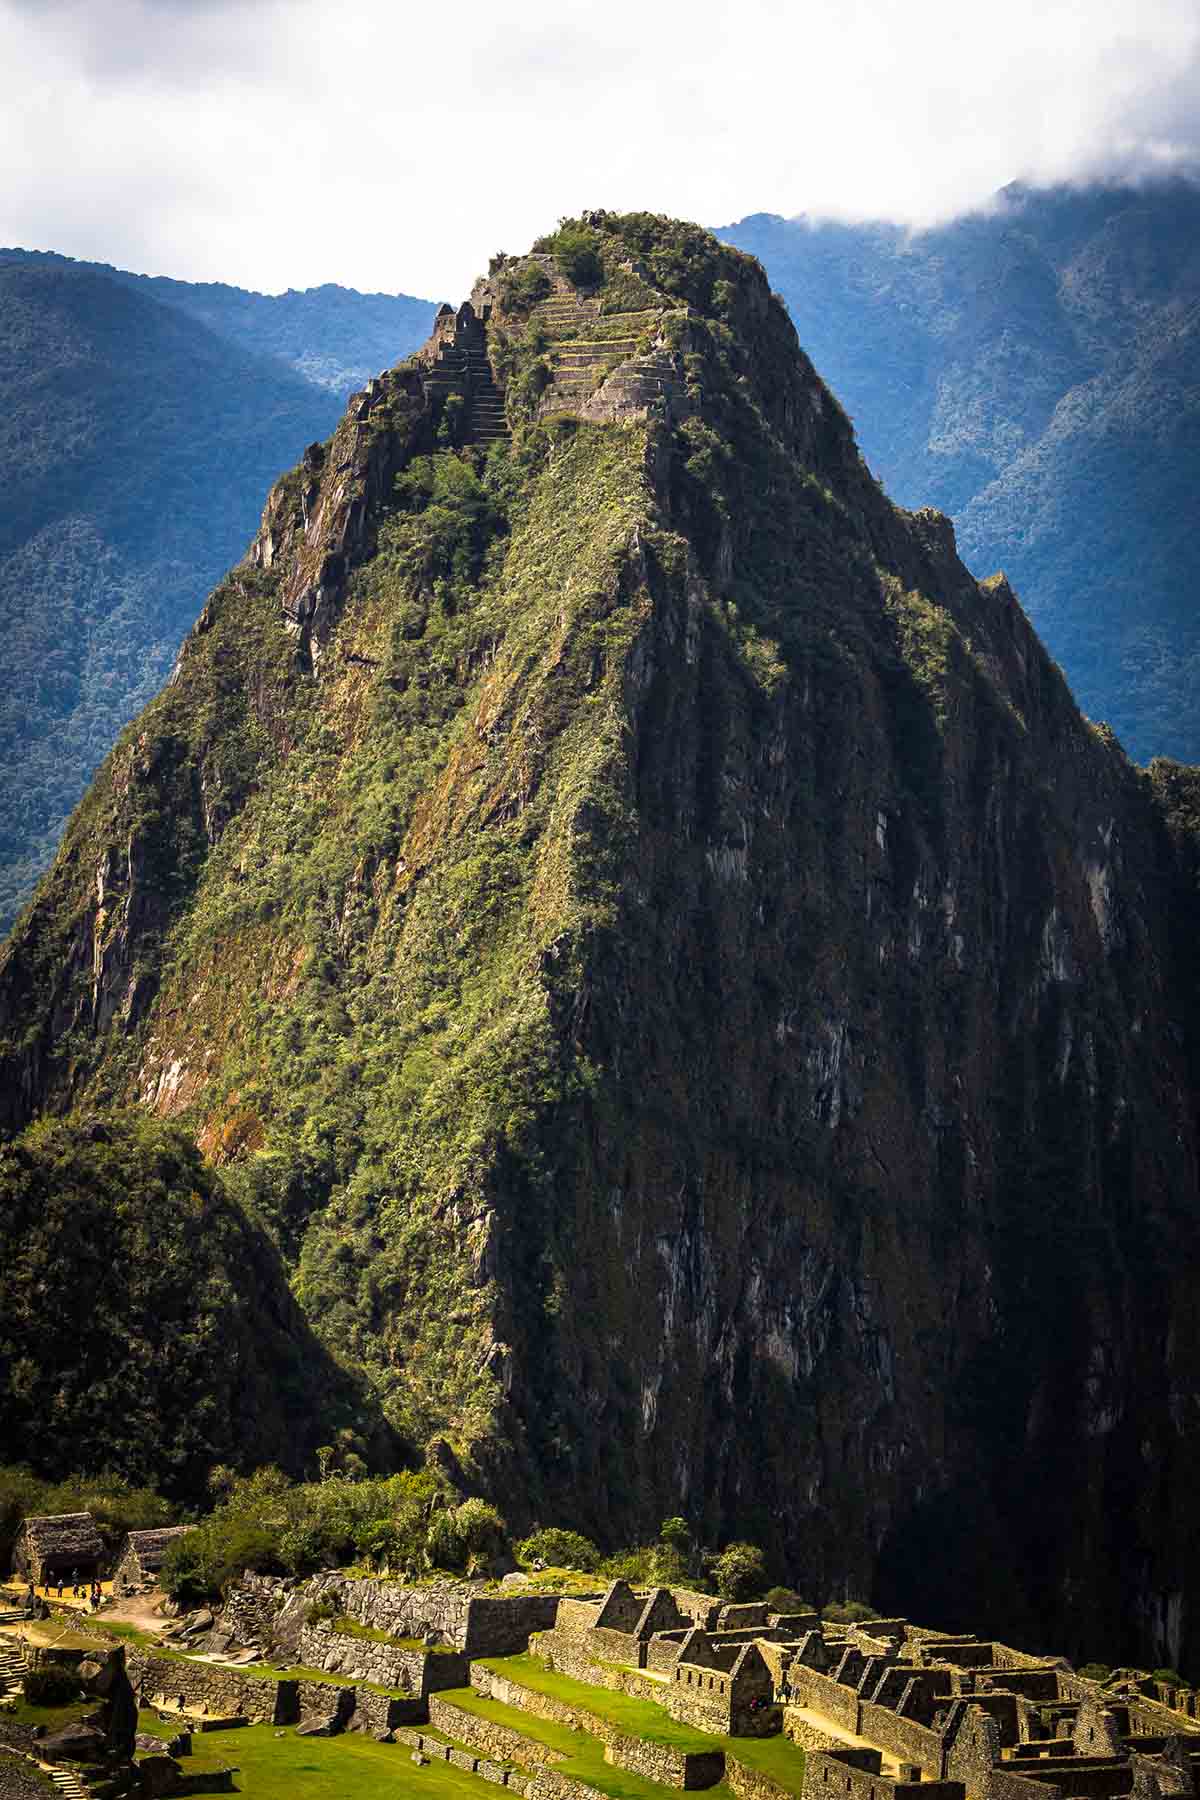 Huayna Picchu looms over the Machu Picchu ruins with the Moon Temple visible at the top.